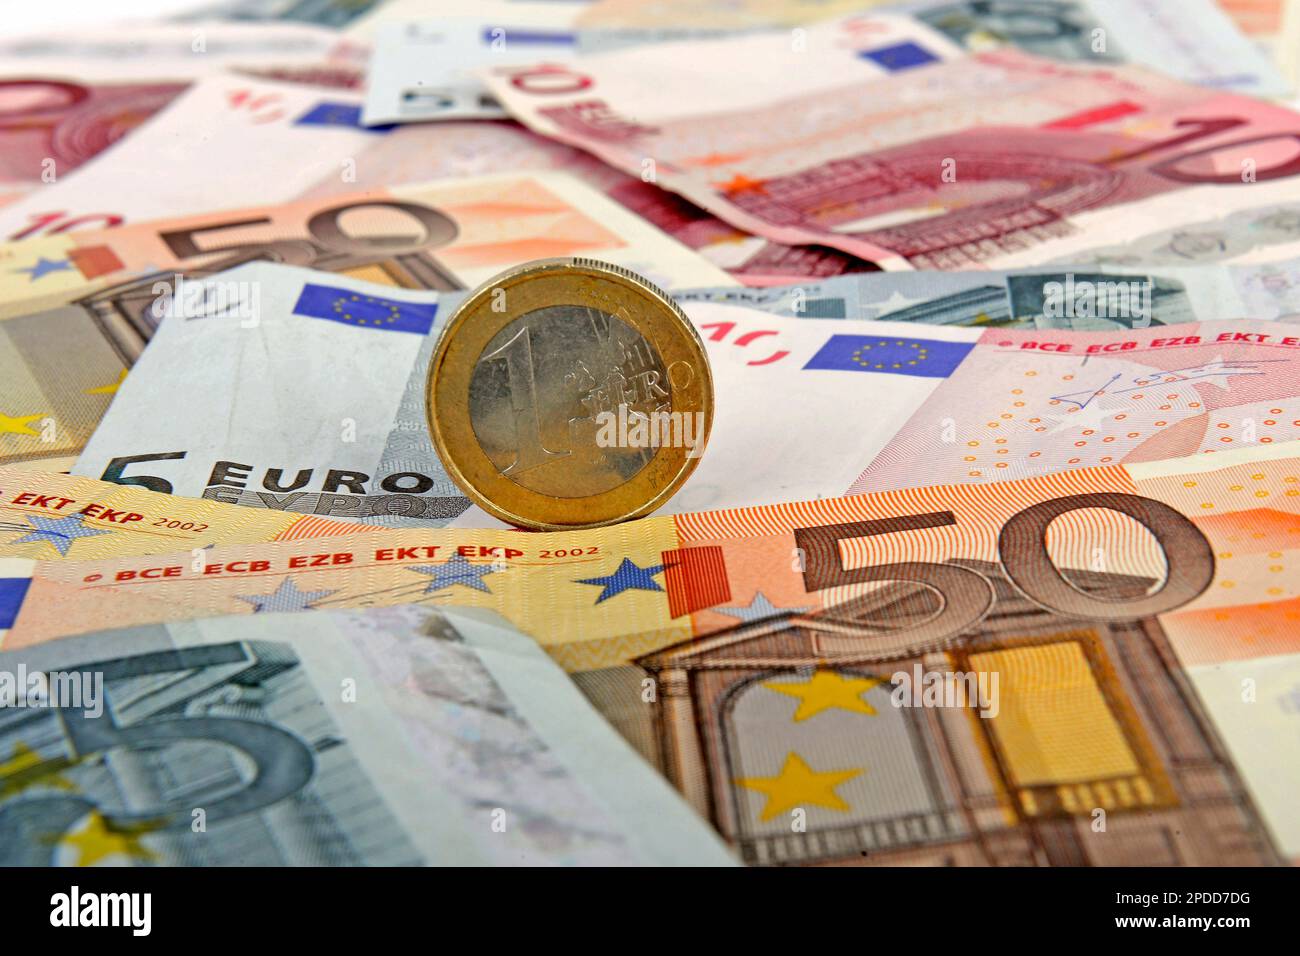 different Euro bills and a 1 Euro coin Stock Photo